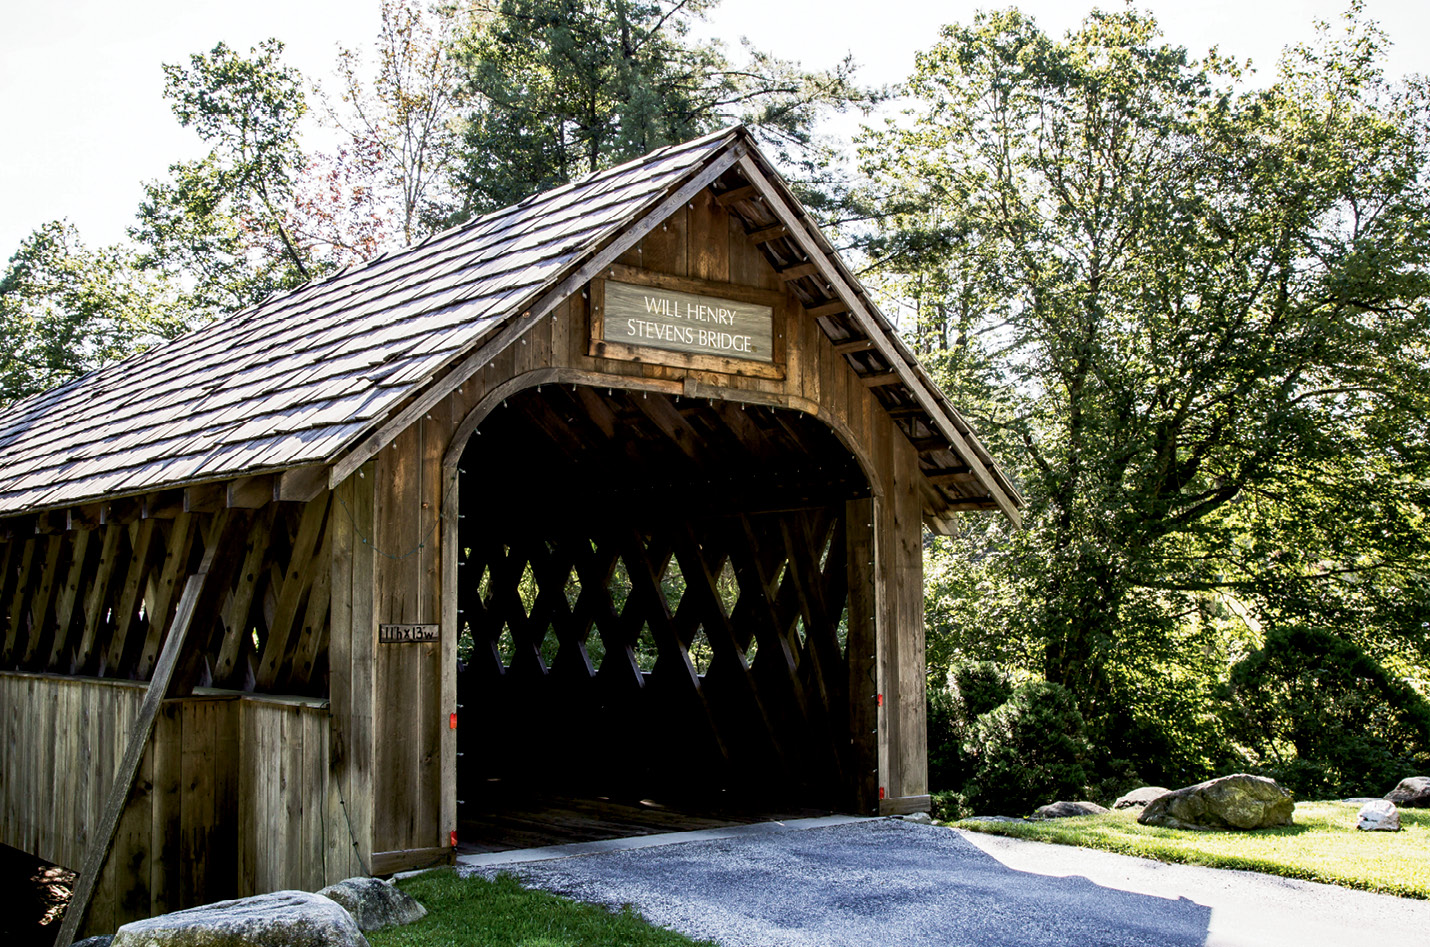 The covered bridge entrance to The Bascom arts center is a reclaimed wooden structure named for artist Will Henry Stevens.